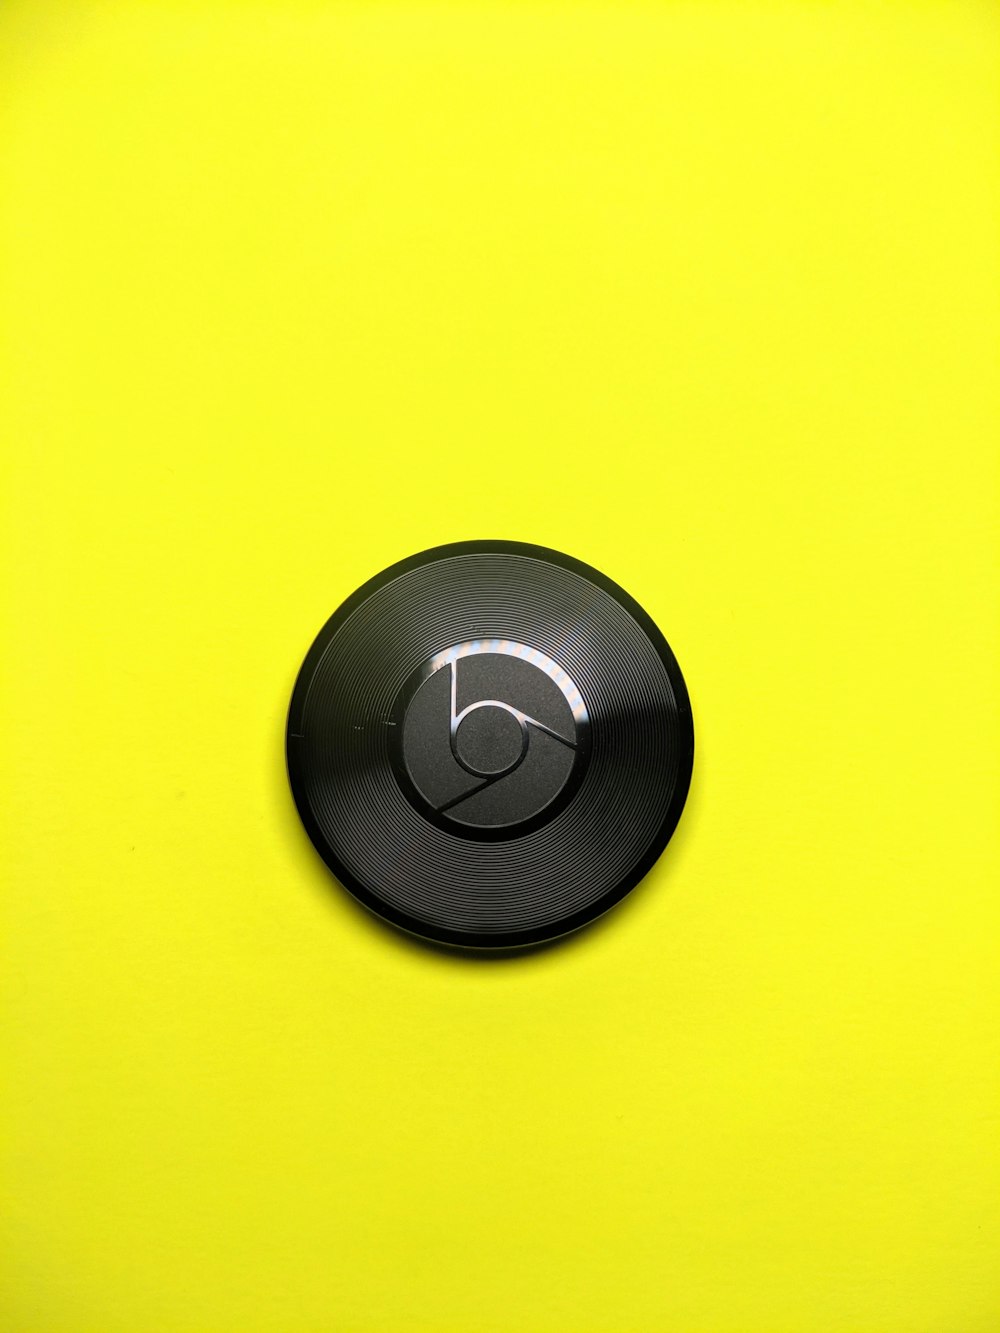 a close up of a button on a yellow surface